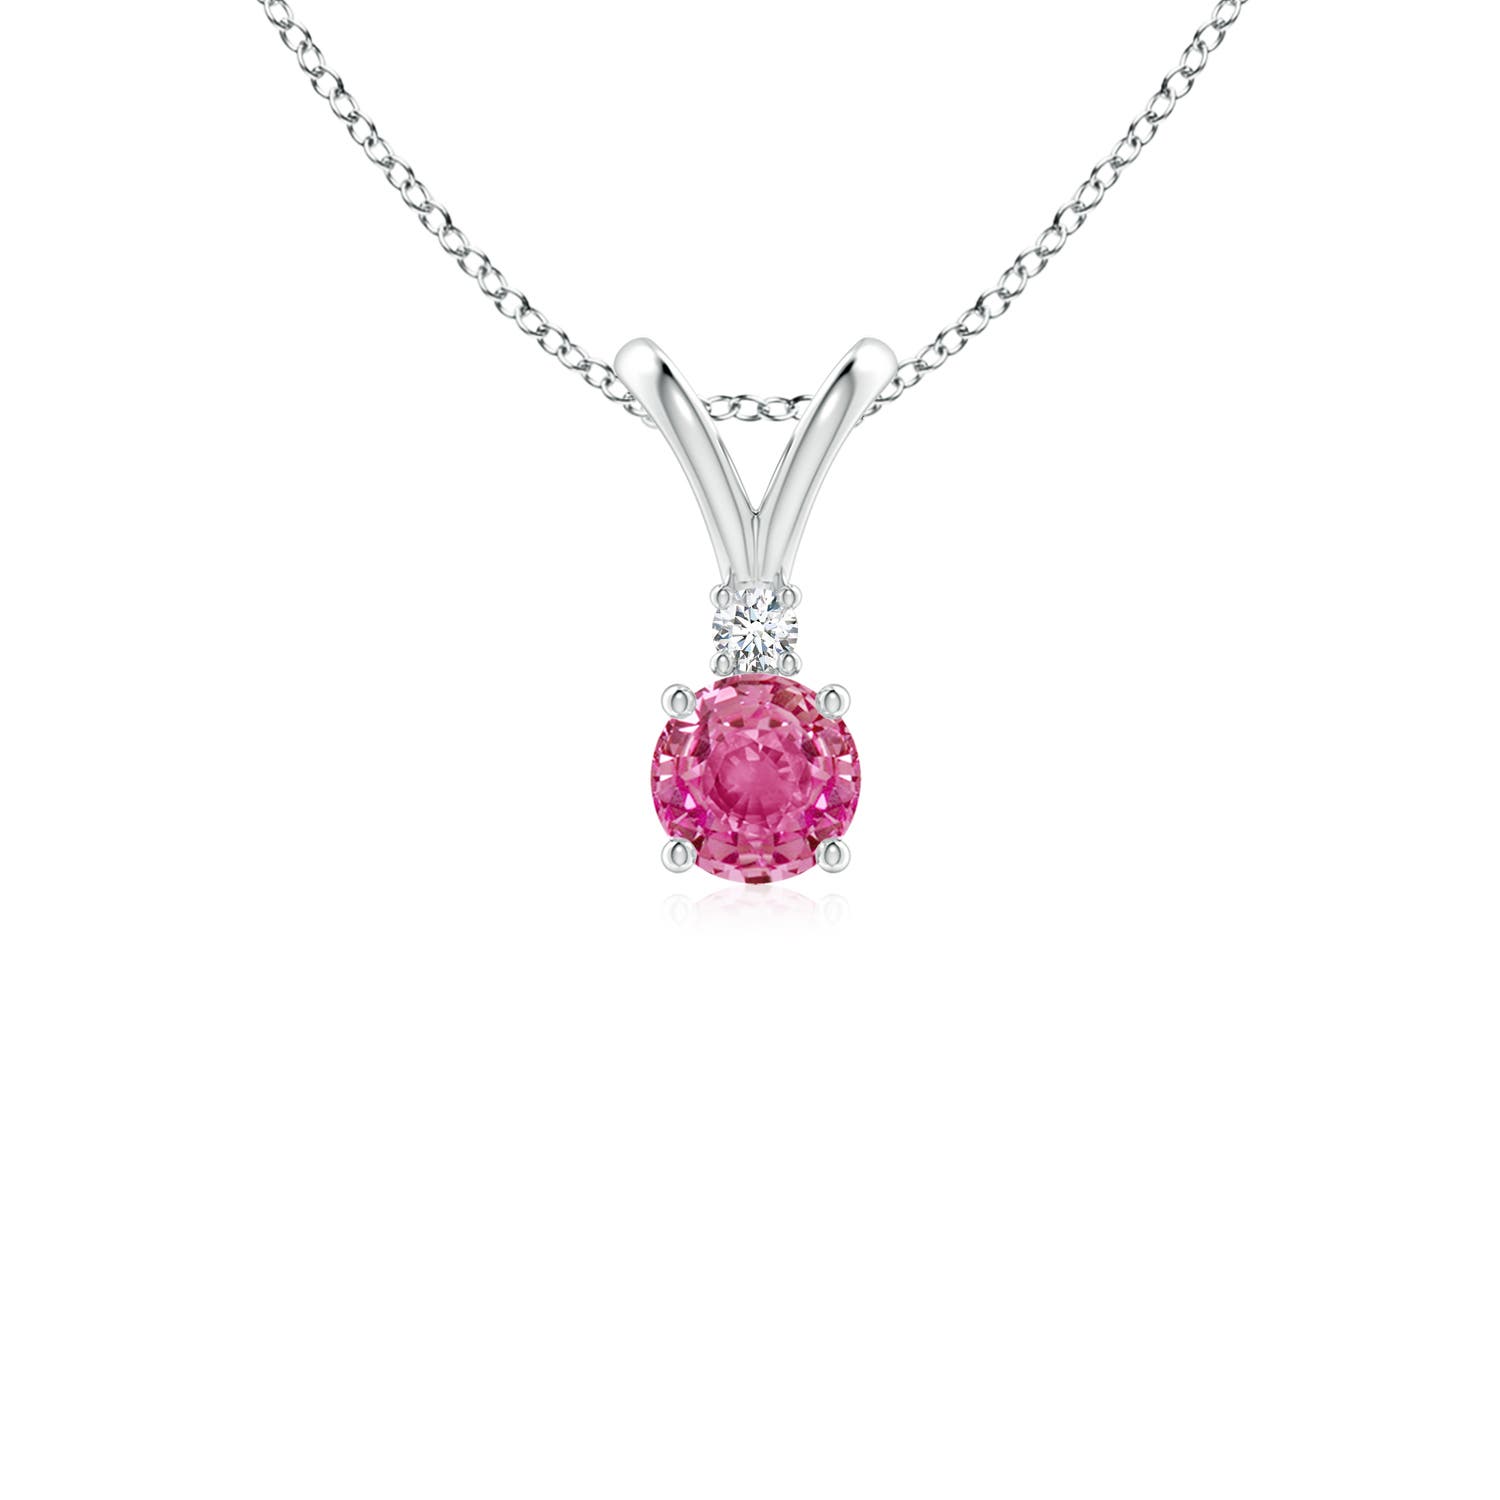 AAA - Pink Sapphire / 0.34 CT / 14 KT White Gold